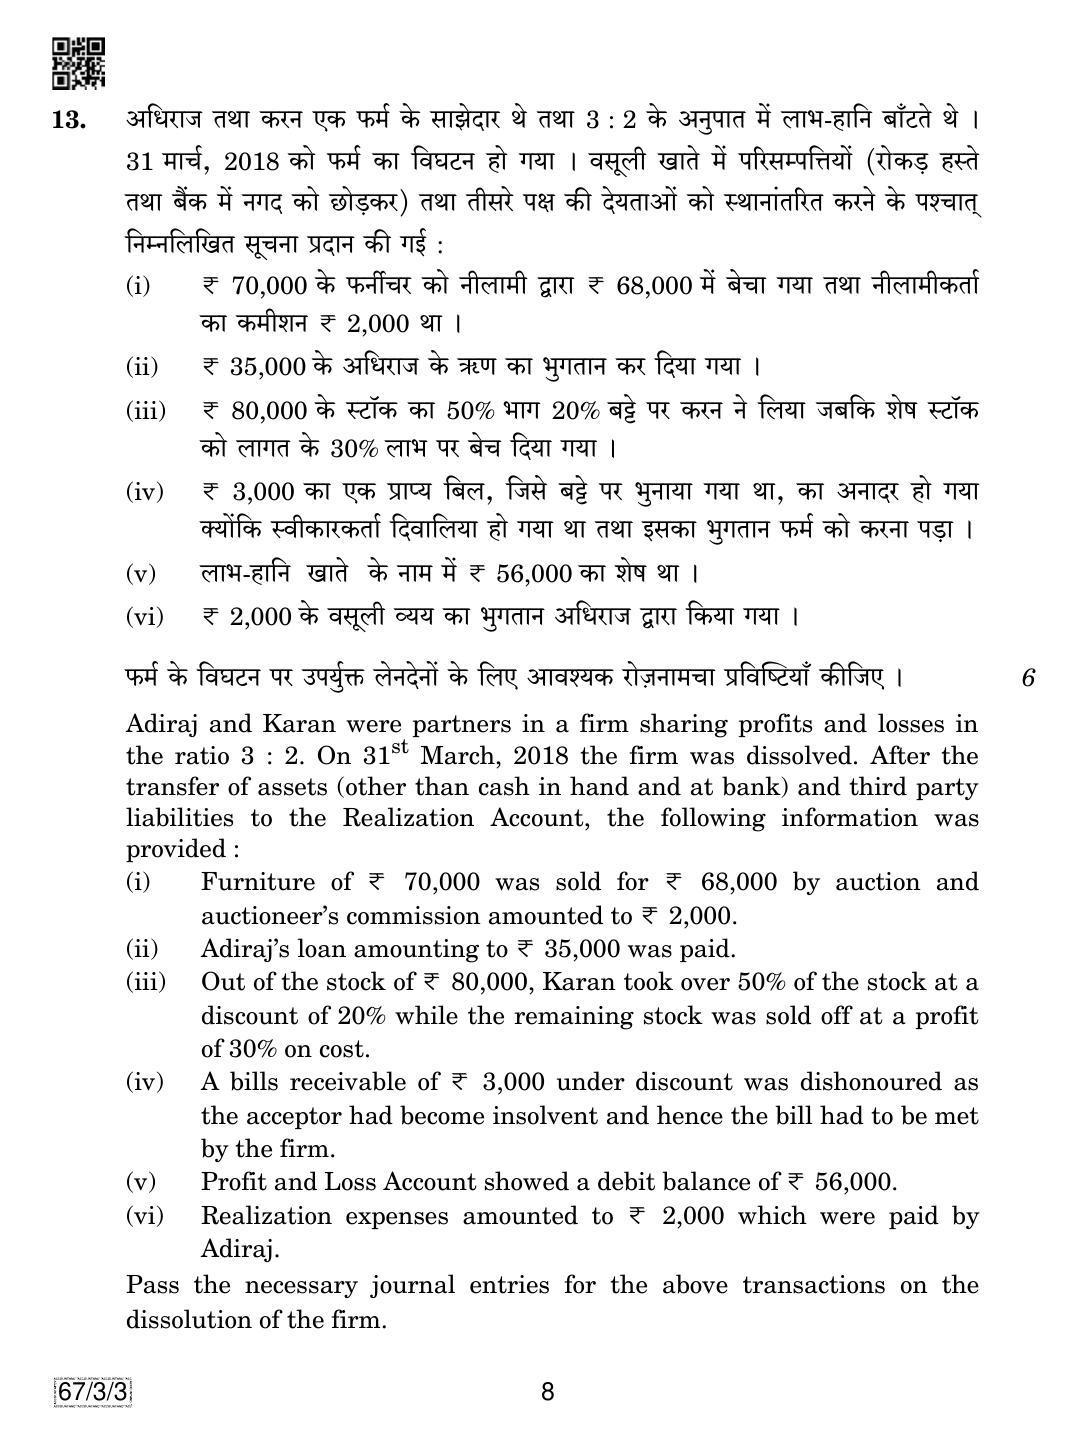 CBSE Class 12 67-3-3 Accountancy 2019 Question Paper - Page 8